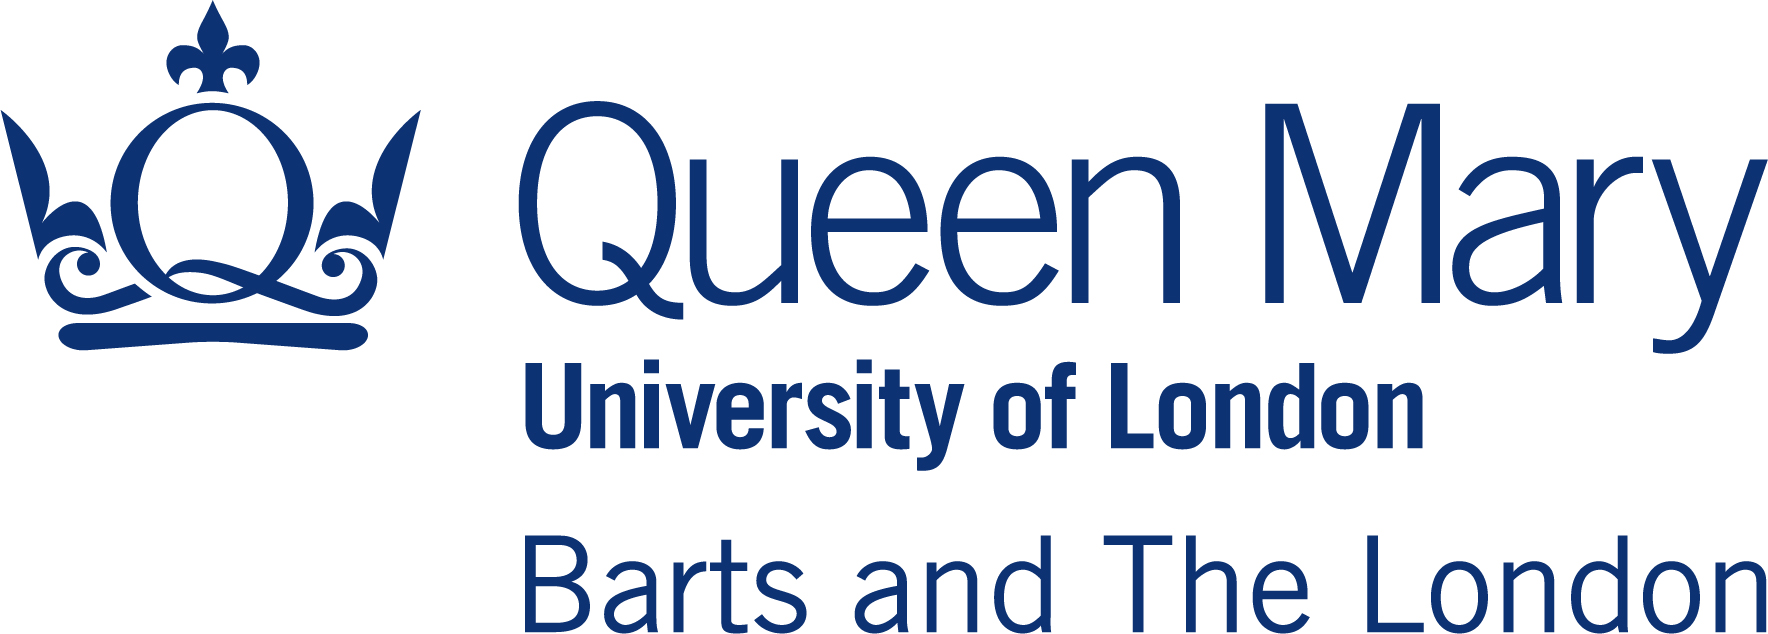 Queen Mary University of London, Barts and The London